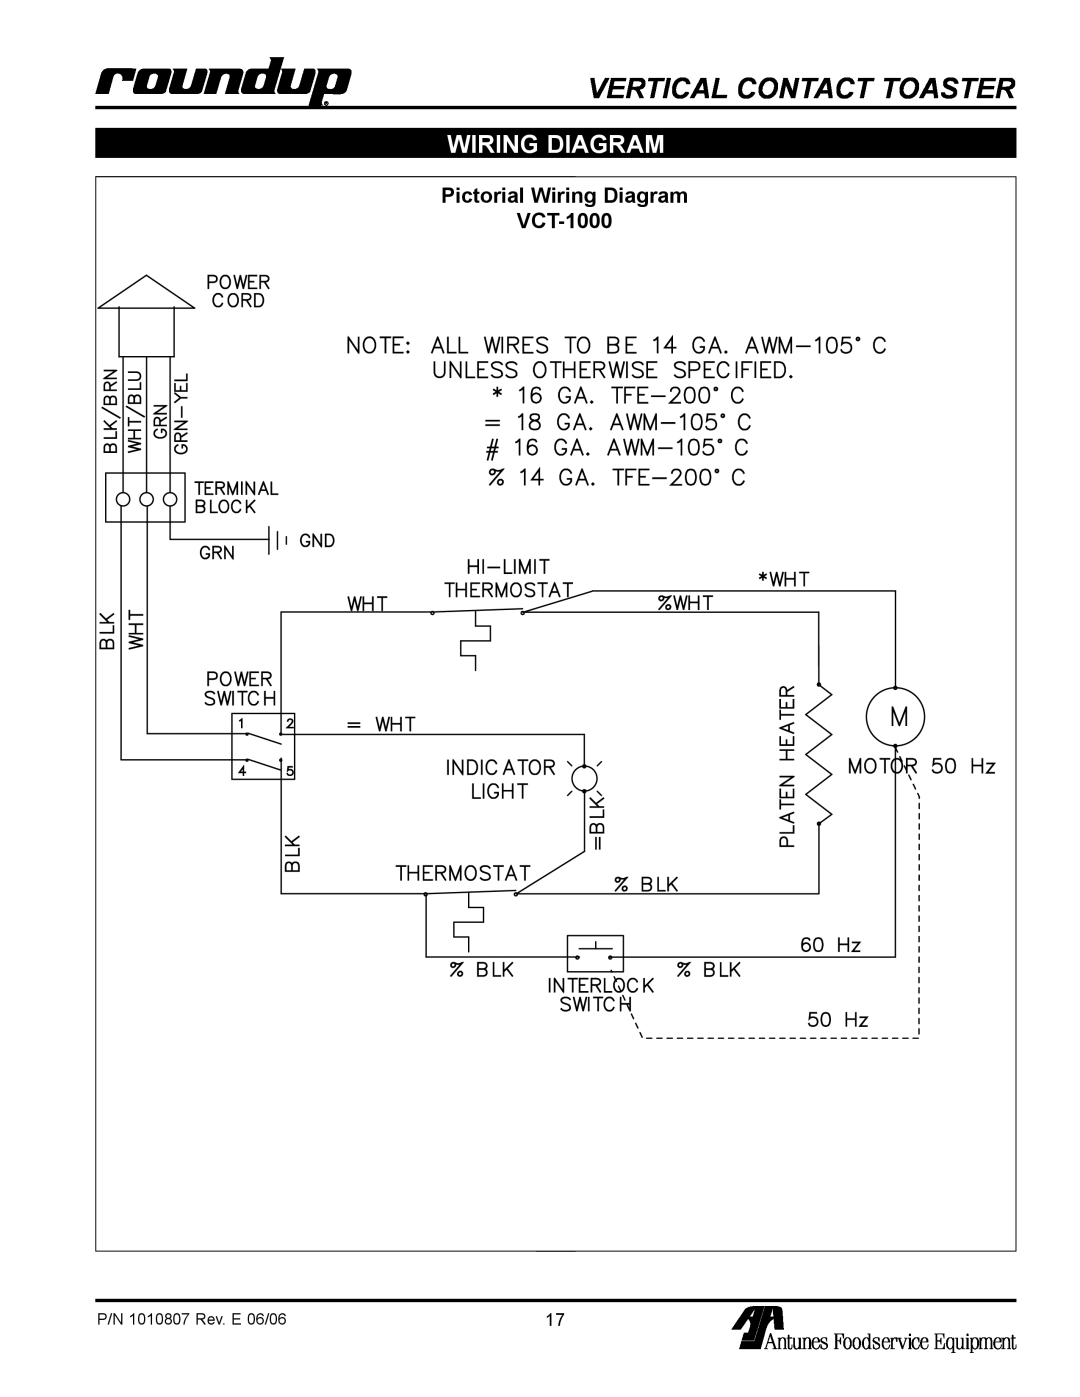 Antunes, AJ VCT-1000 Pictorial Wiring Diagram, NOTE ALL WIRES TO BE 14 GA. AWM -105C, Unless Otherwise Specified 